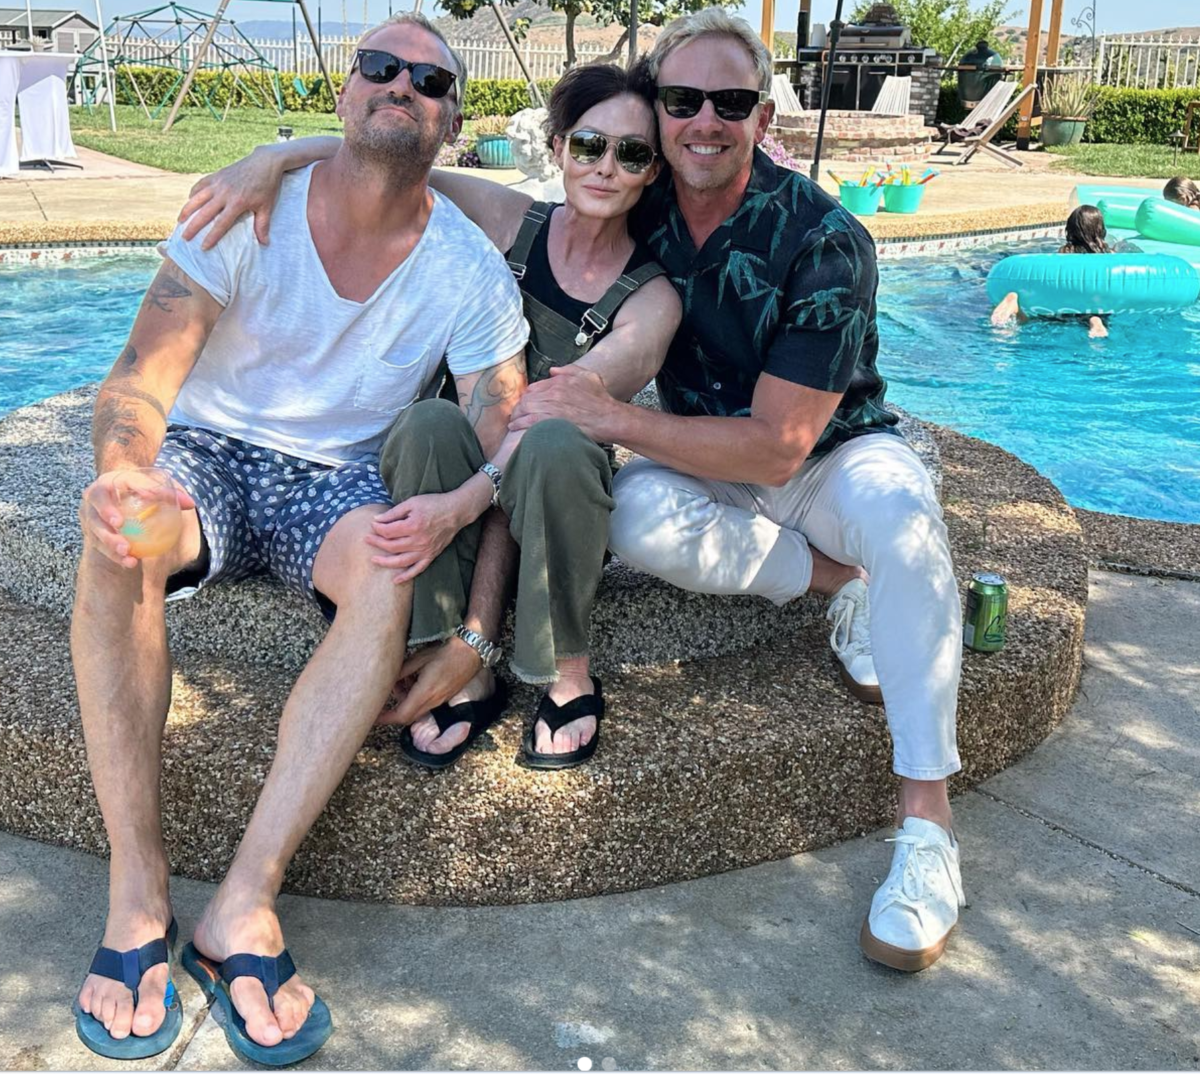 Brian Austin Green Shares Cancer Update on Shannen Doherty; Offers Support to Tori Spelling During ‘Difficult’ Situation
